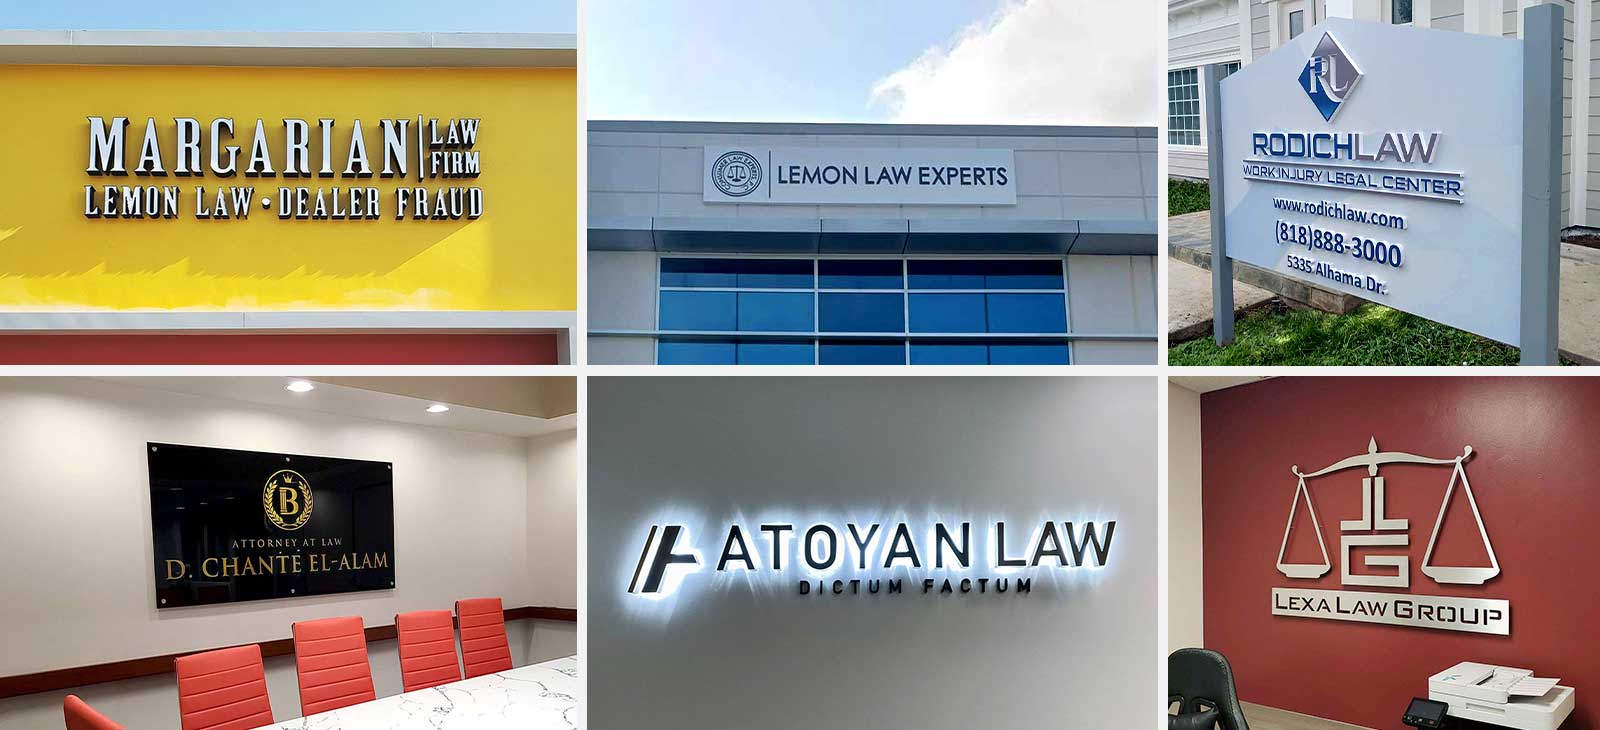 Law office signage displays in different styles for outdoor and indoor areas